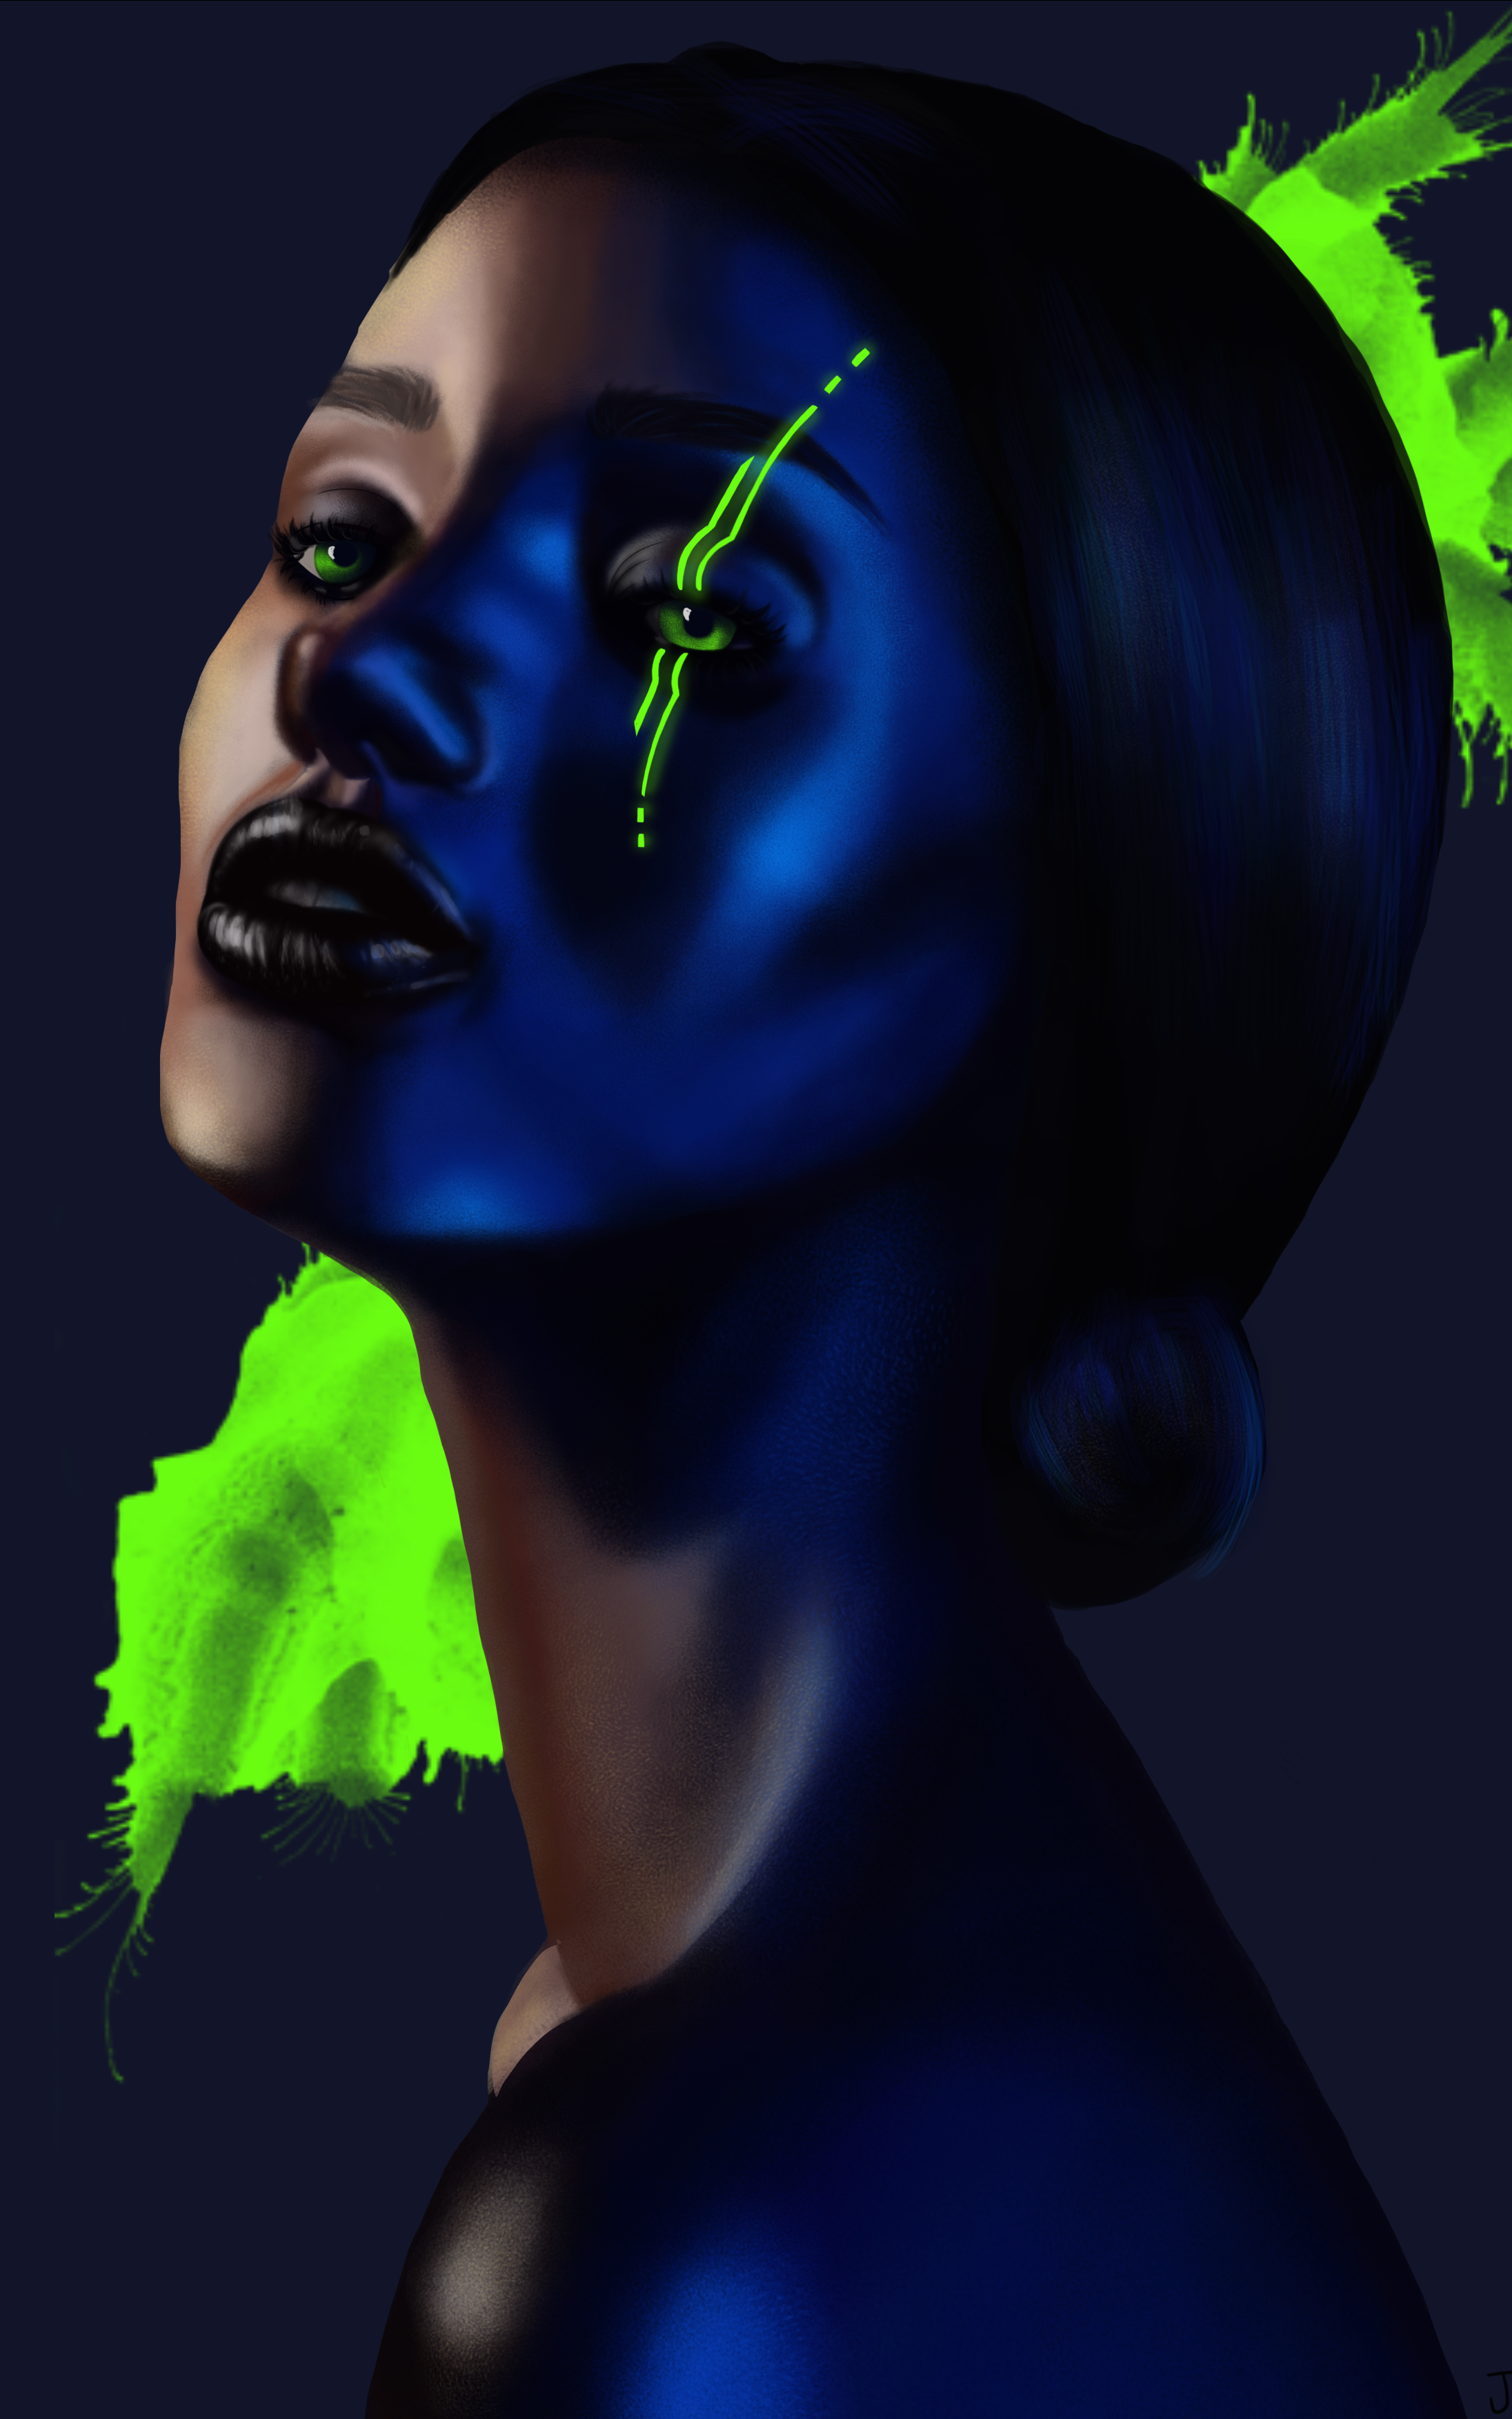 Realistic portrait illustration of cyberpunk woman with blue lighting and neon green details